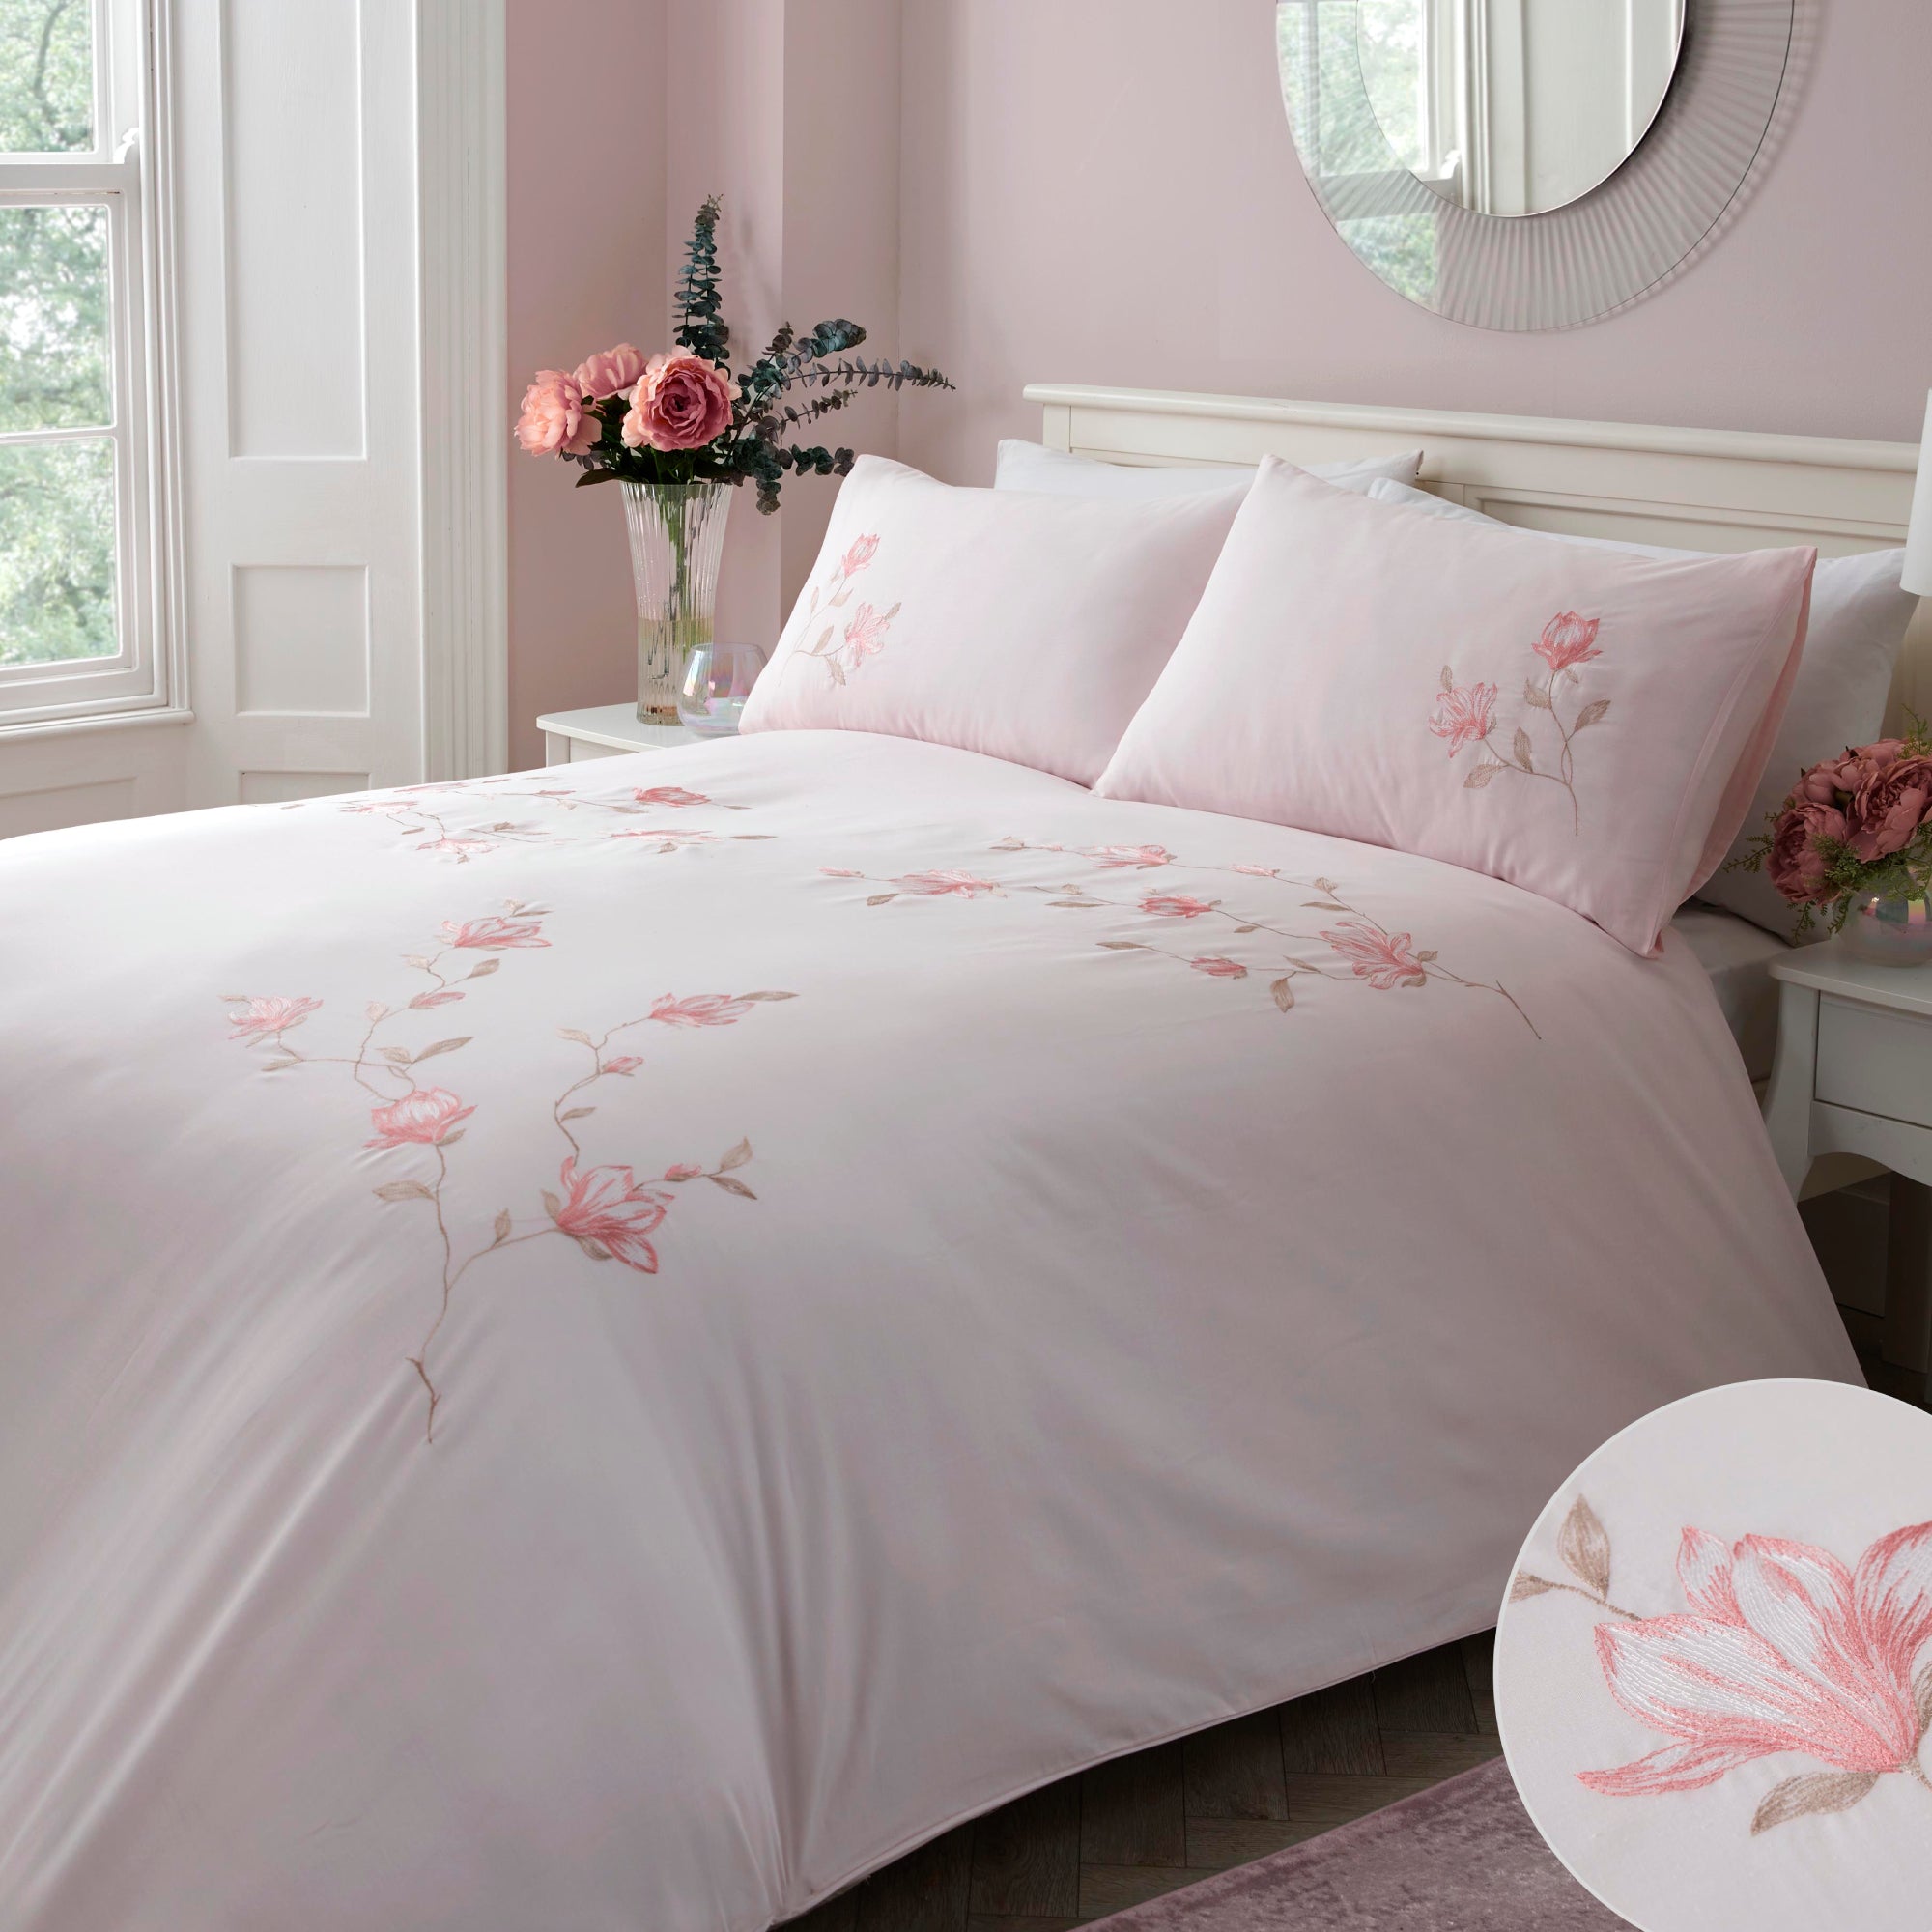 Duvet Cover Set Margot by Dreams & Drapes Woven in Pink